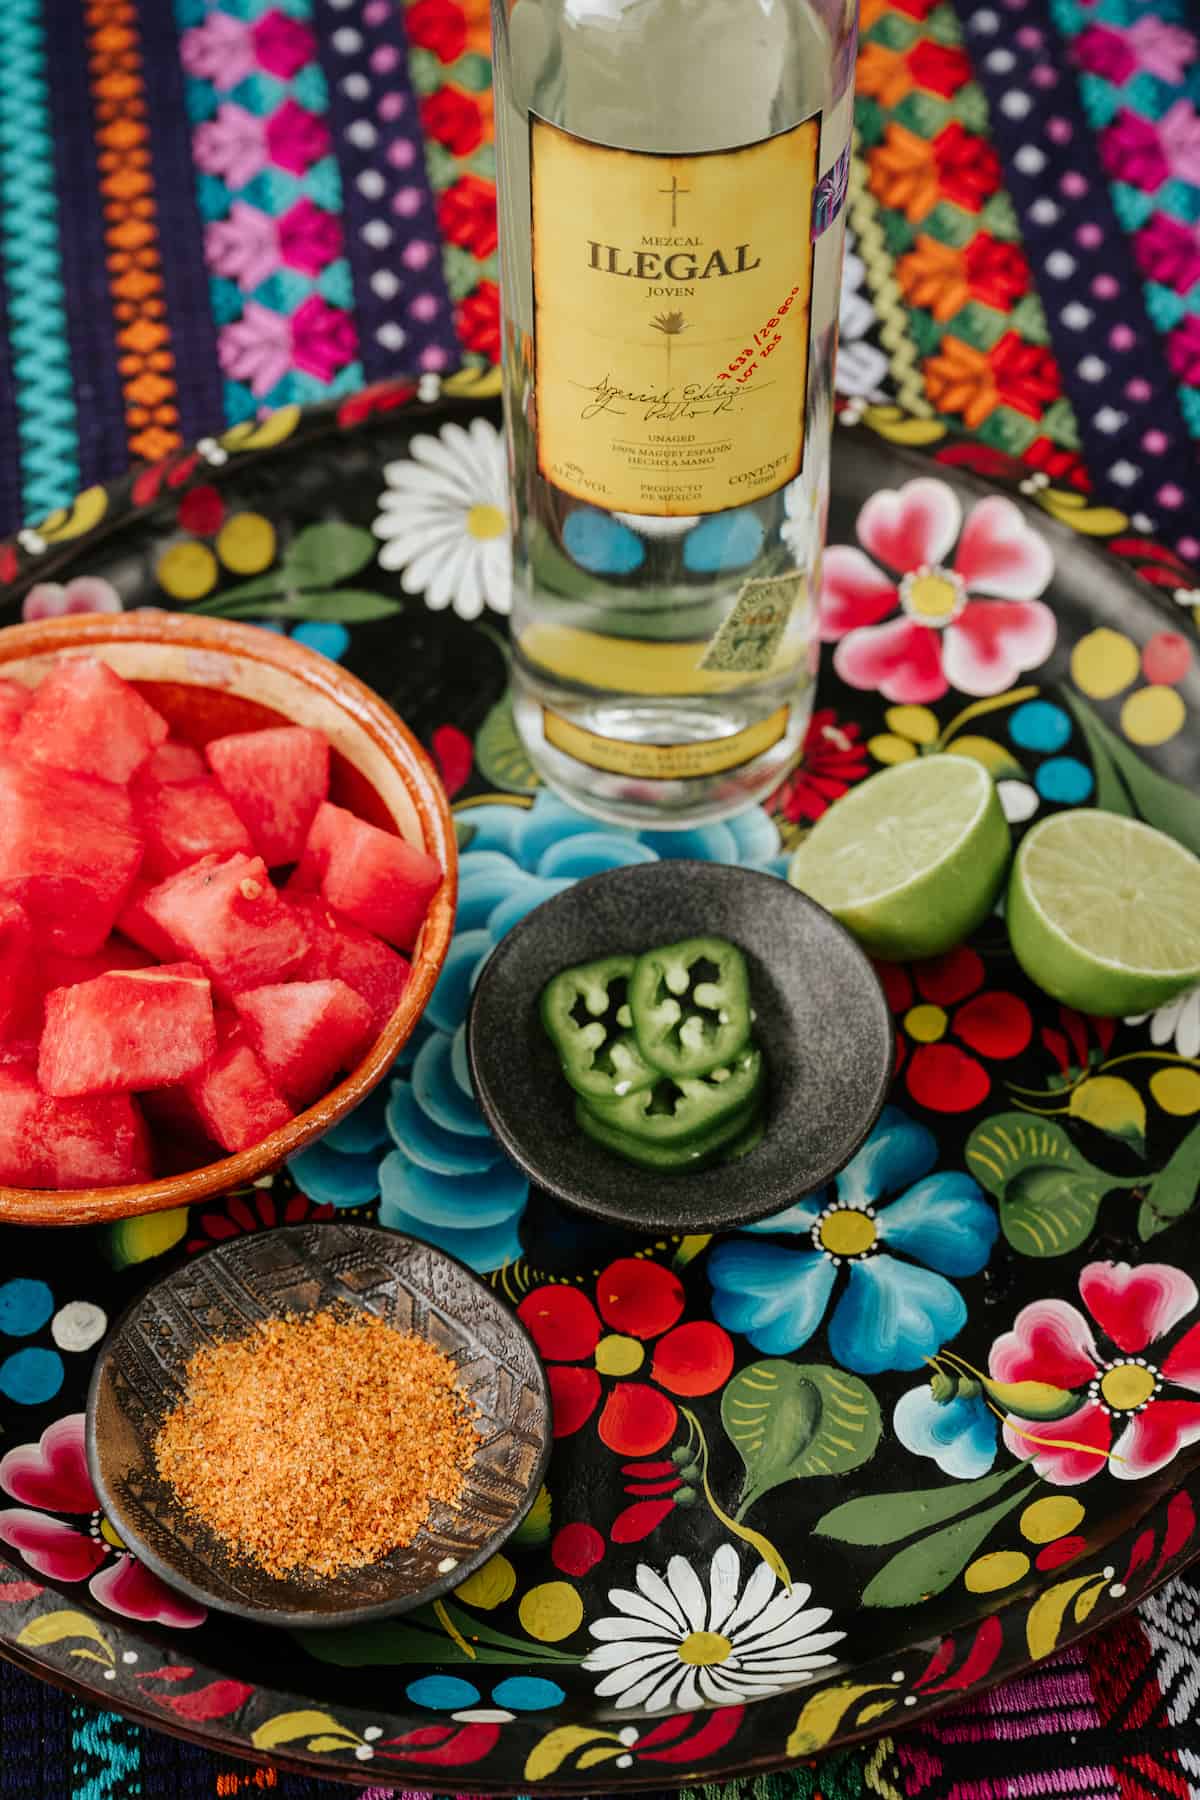 ingredients needed to make a spicy mezcal margarita with jalapeno and watermelon measured out on a hand-painted floral tray.